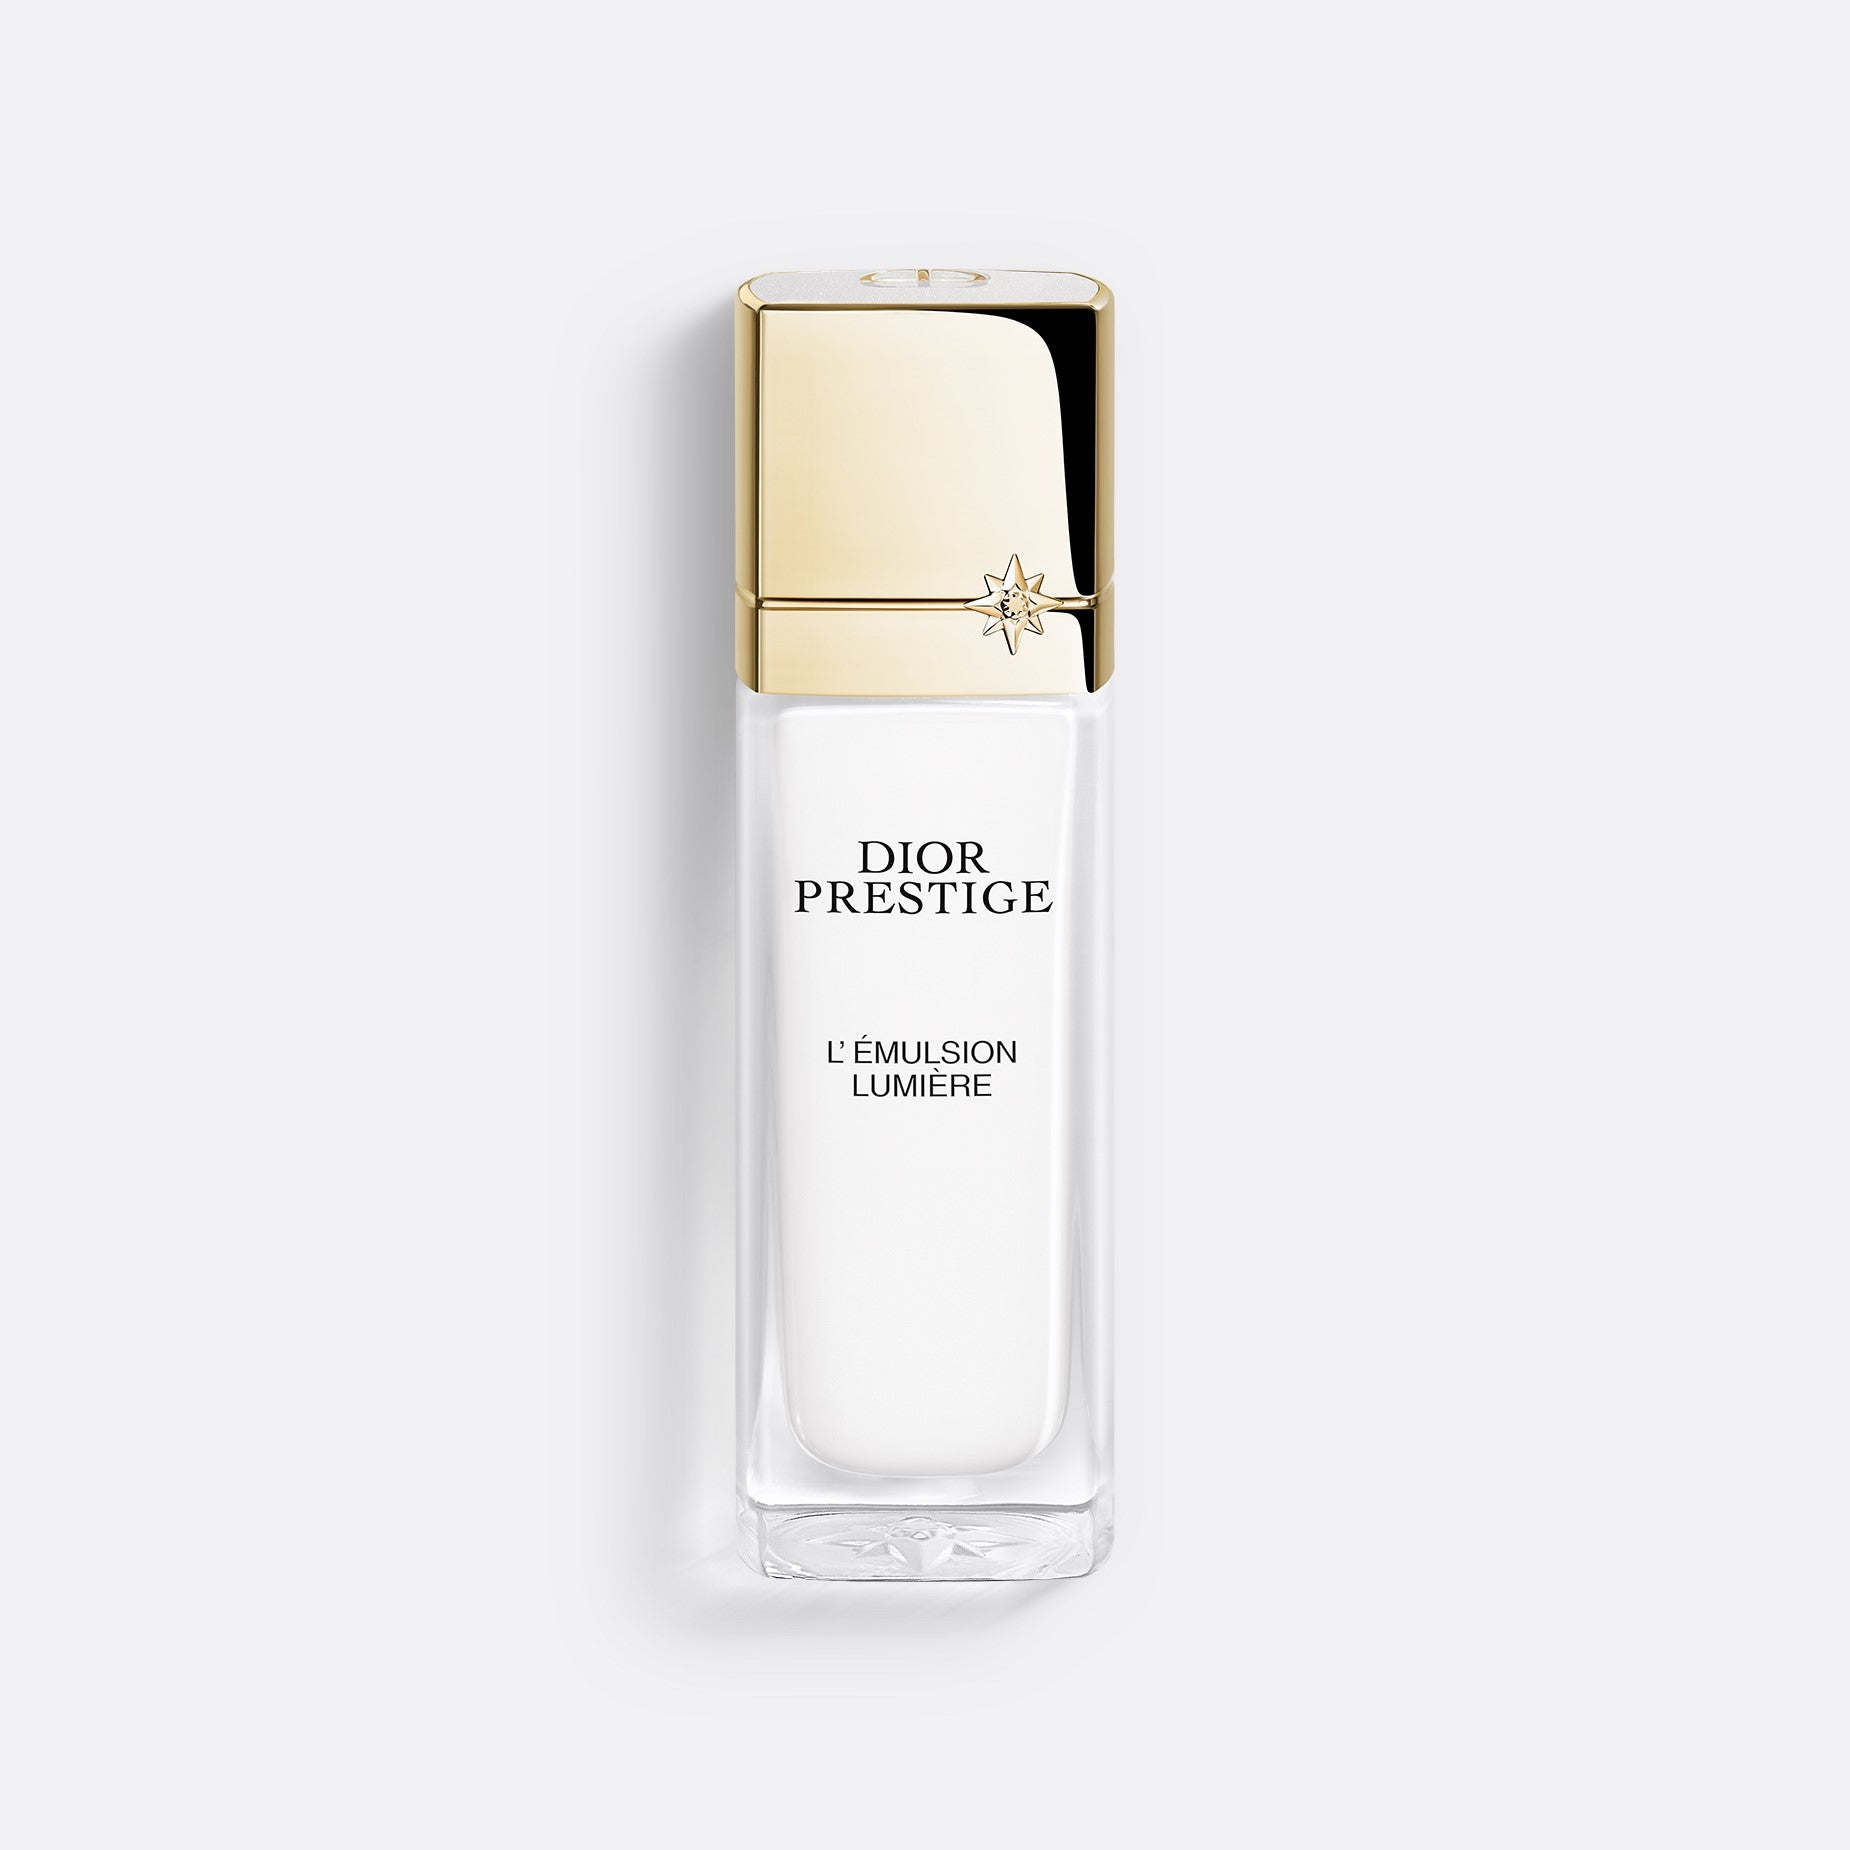 DIOR PRESTIGE L'ÉMULSION LUMIÈRE | Brightening and Revitalizing Skincare - Hydrates, Revitalizes and Evens Out the Skin